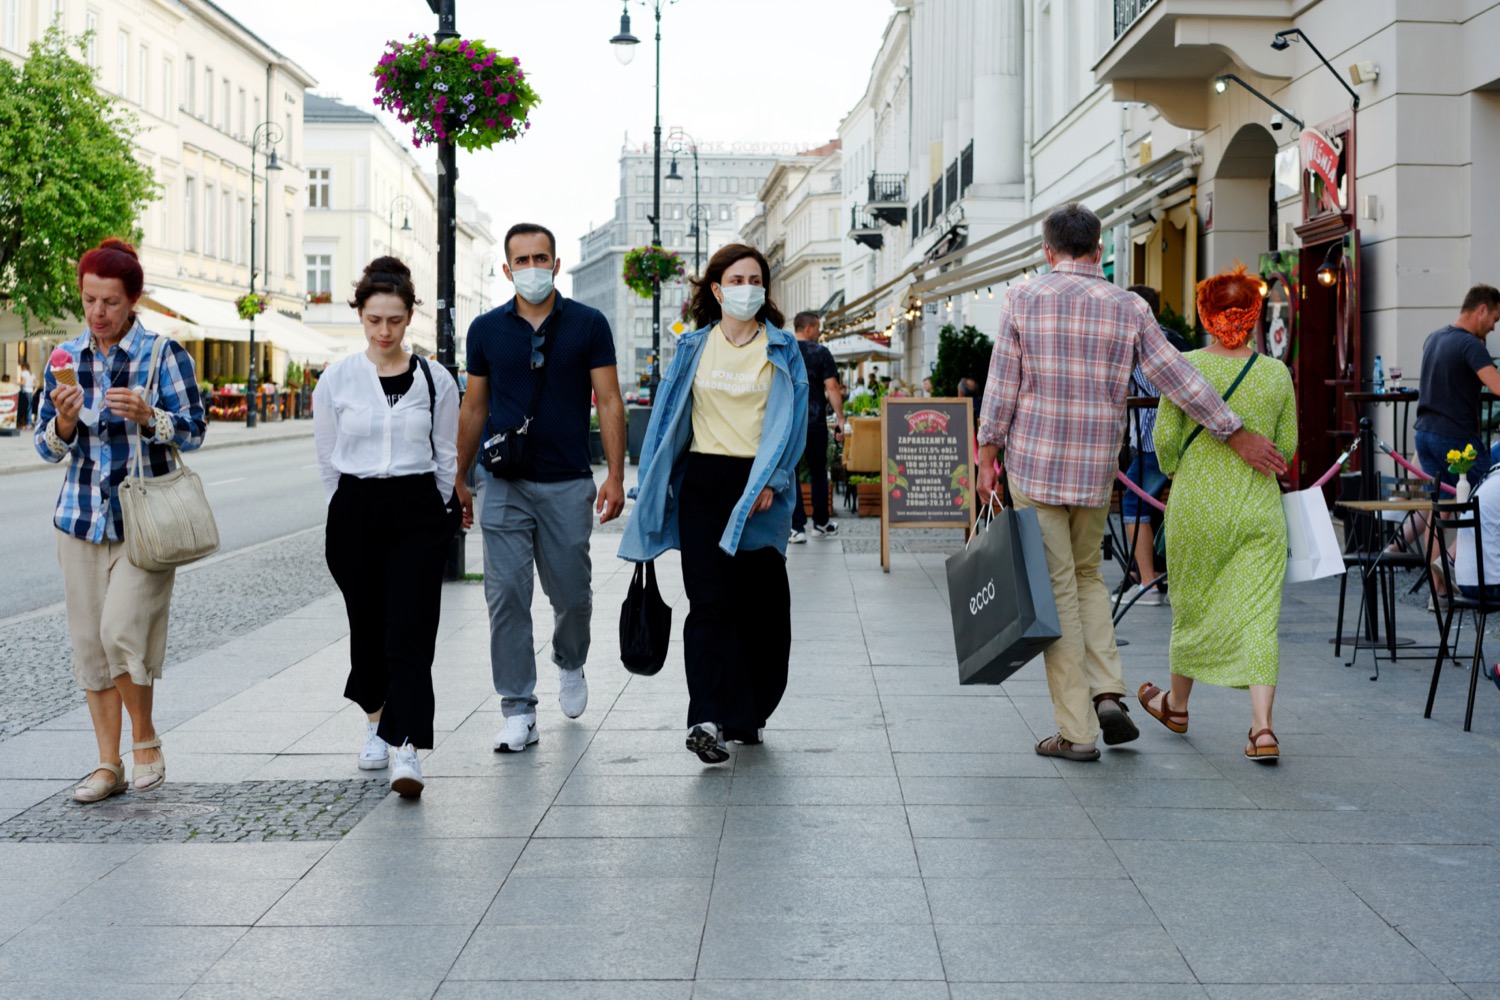 six white people walking on a european street. four people are walking towards the camera, two of which are wearing masks, and the two people not facing the camera walking away, appearing to not be wearing masks